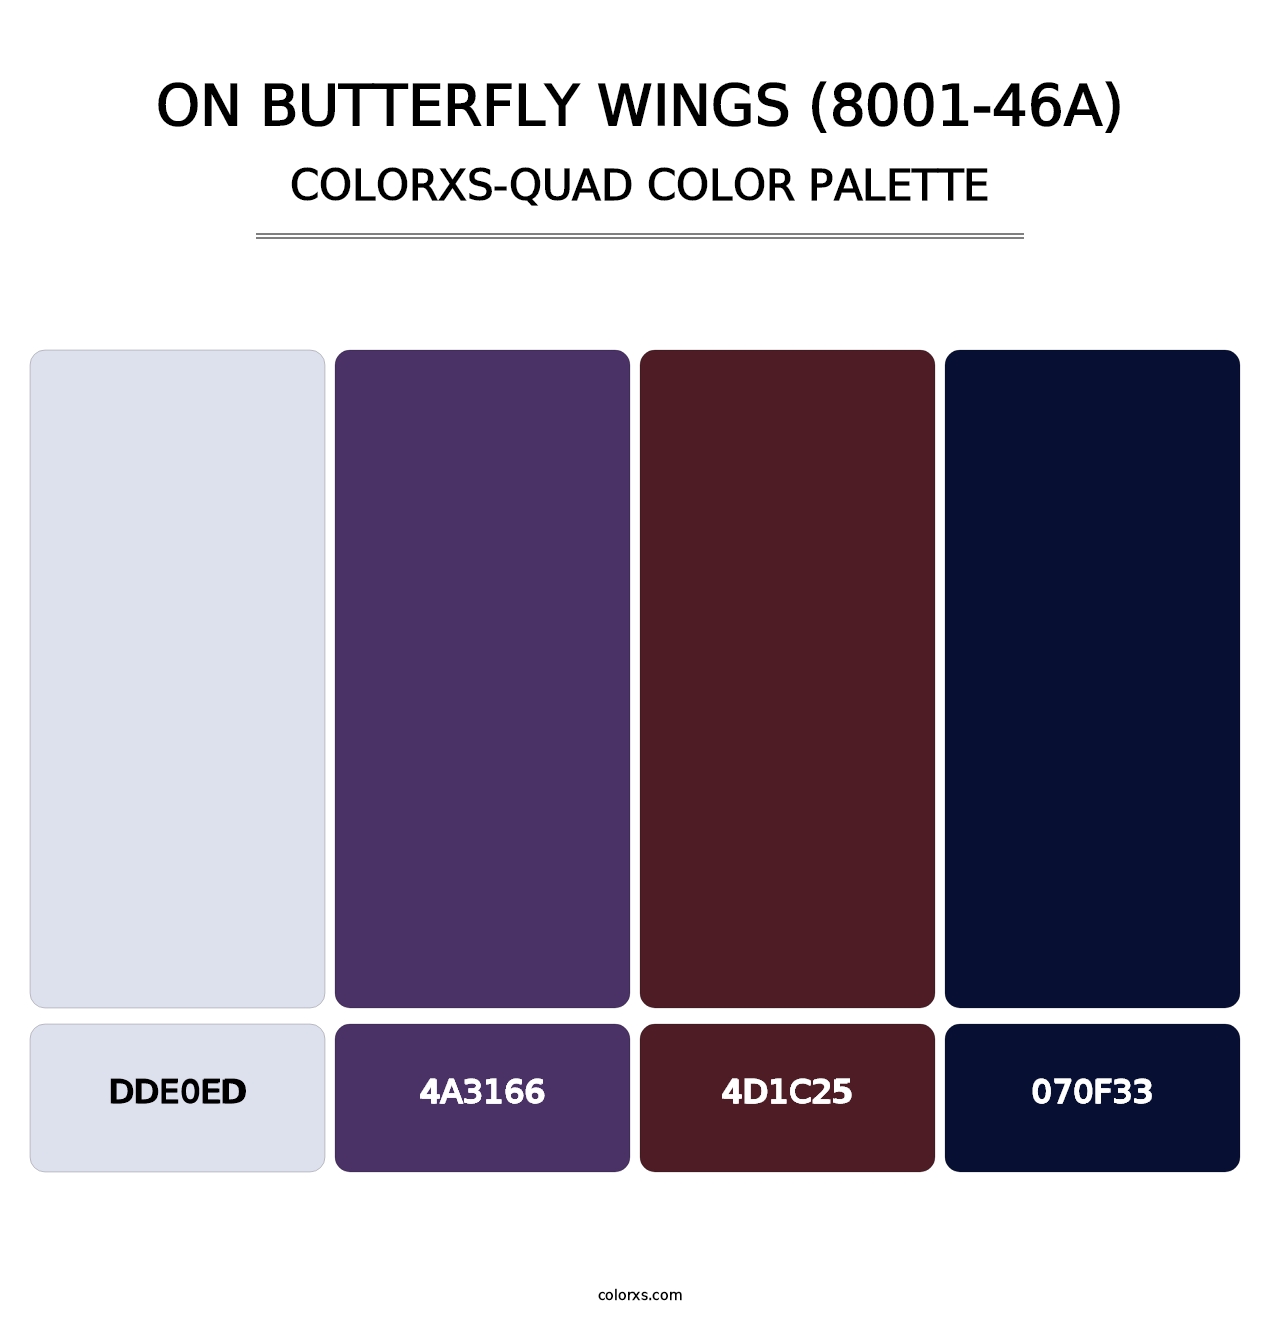 On Butterfly Wings (8001-46A) - Colorxs Quad Palette